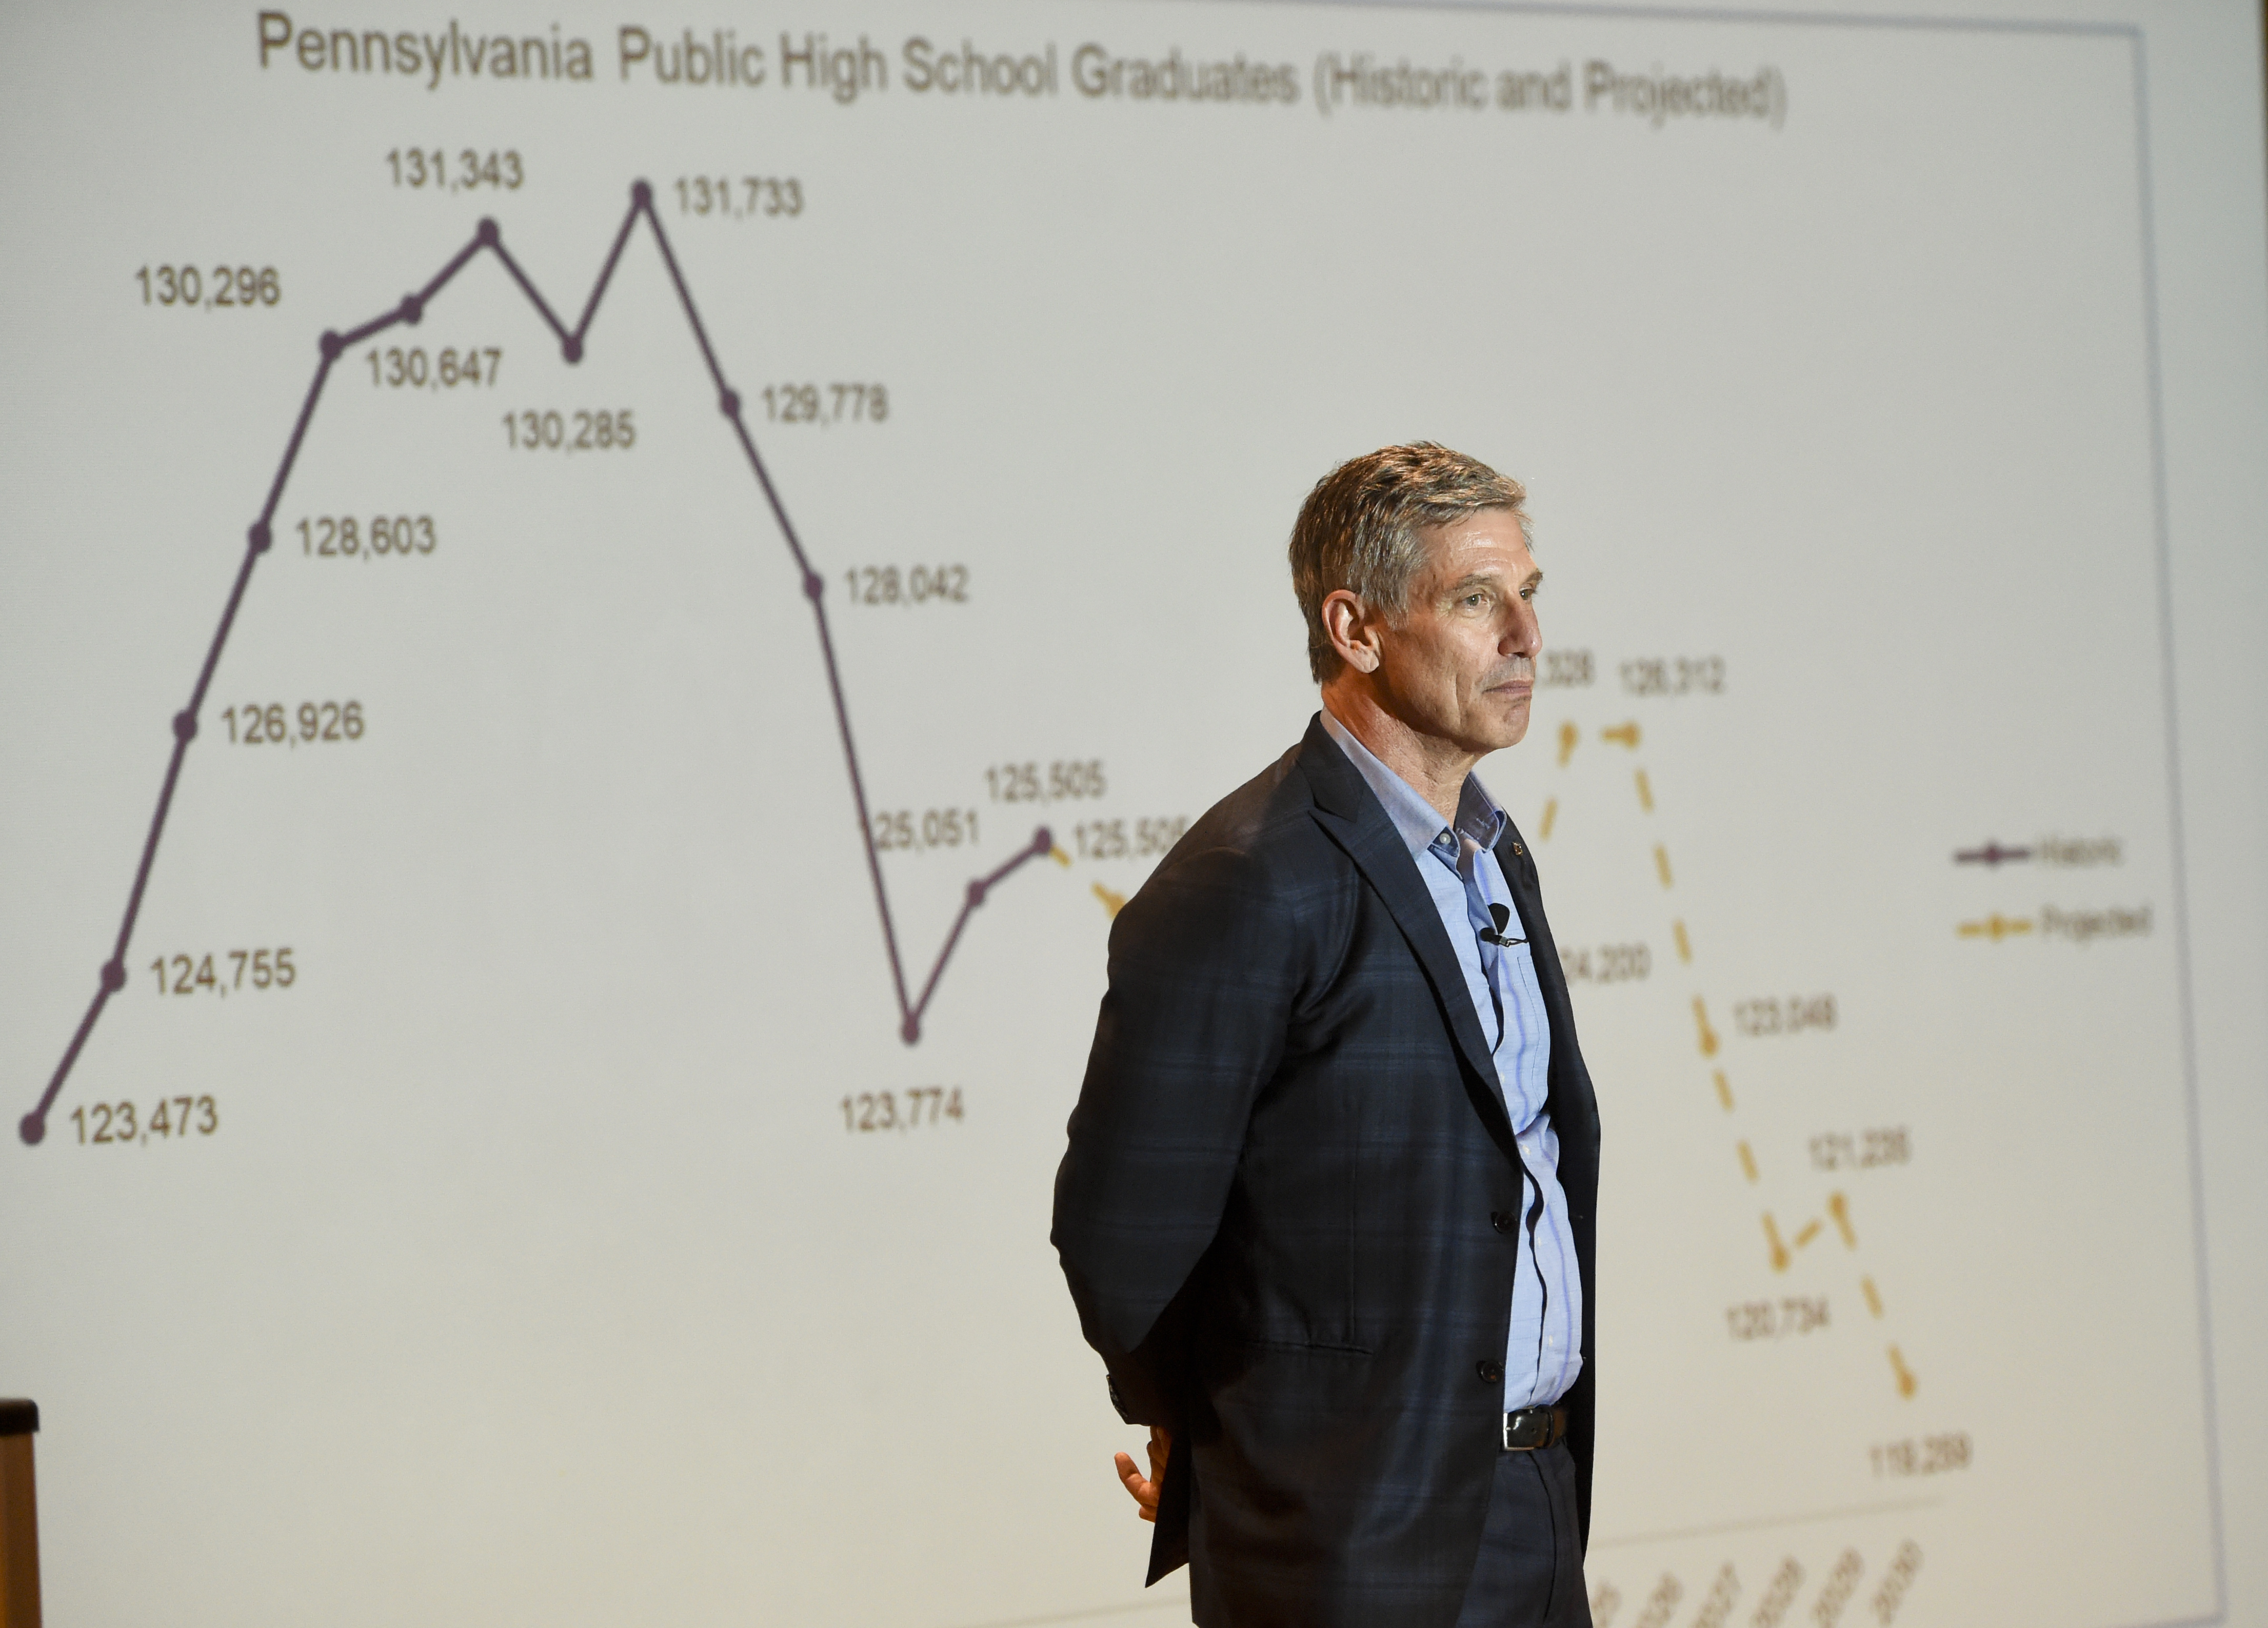 Daniel Greenstein, chancellor of the Pennsylvania State System of Higher Education, stands in front of a graph depicting the falling number of high school graduates in the state.